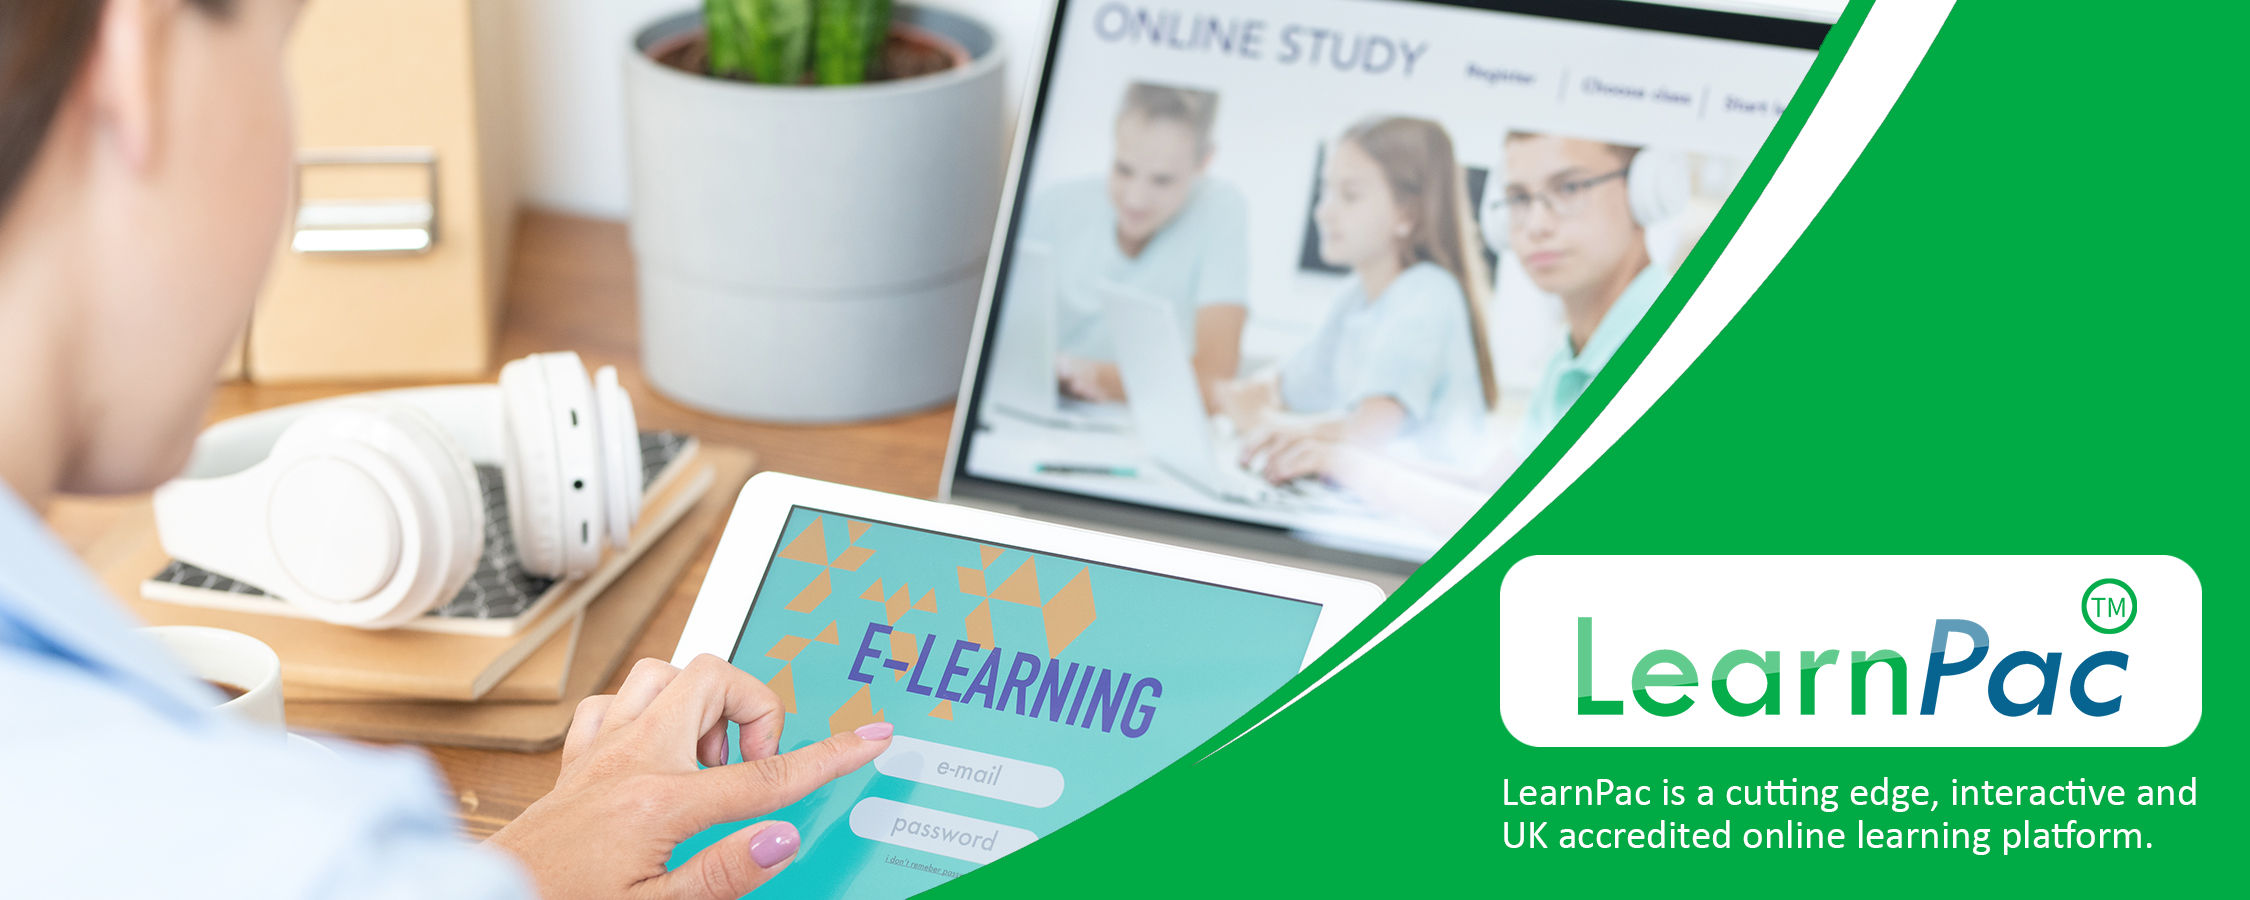 Health and Safety in the Workplace - Level 1 - Online Learning Courses - E-Learning Courses - LearnPac Systems UK -